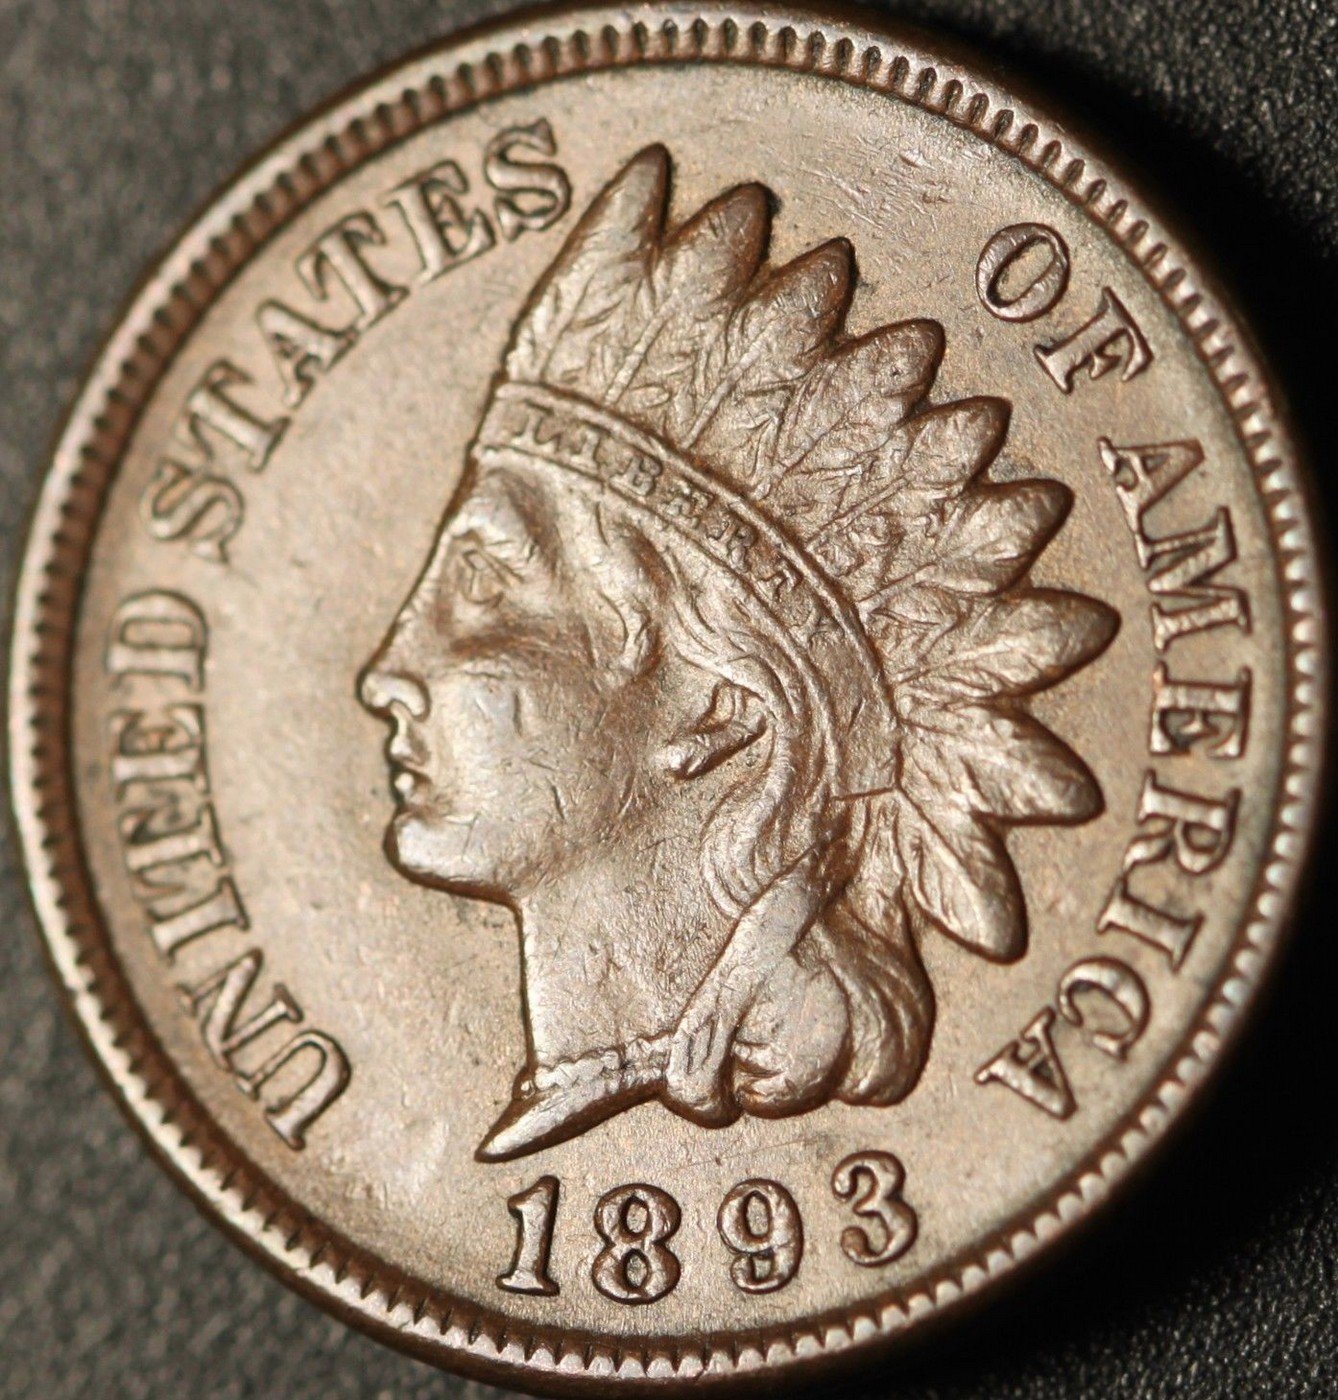 1893 RPD-007 - Indian Head Cent - Photo by Ed Nathanson